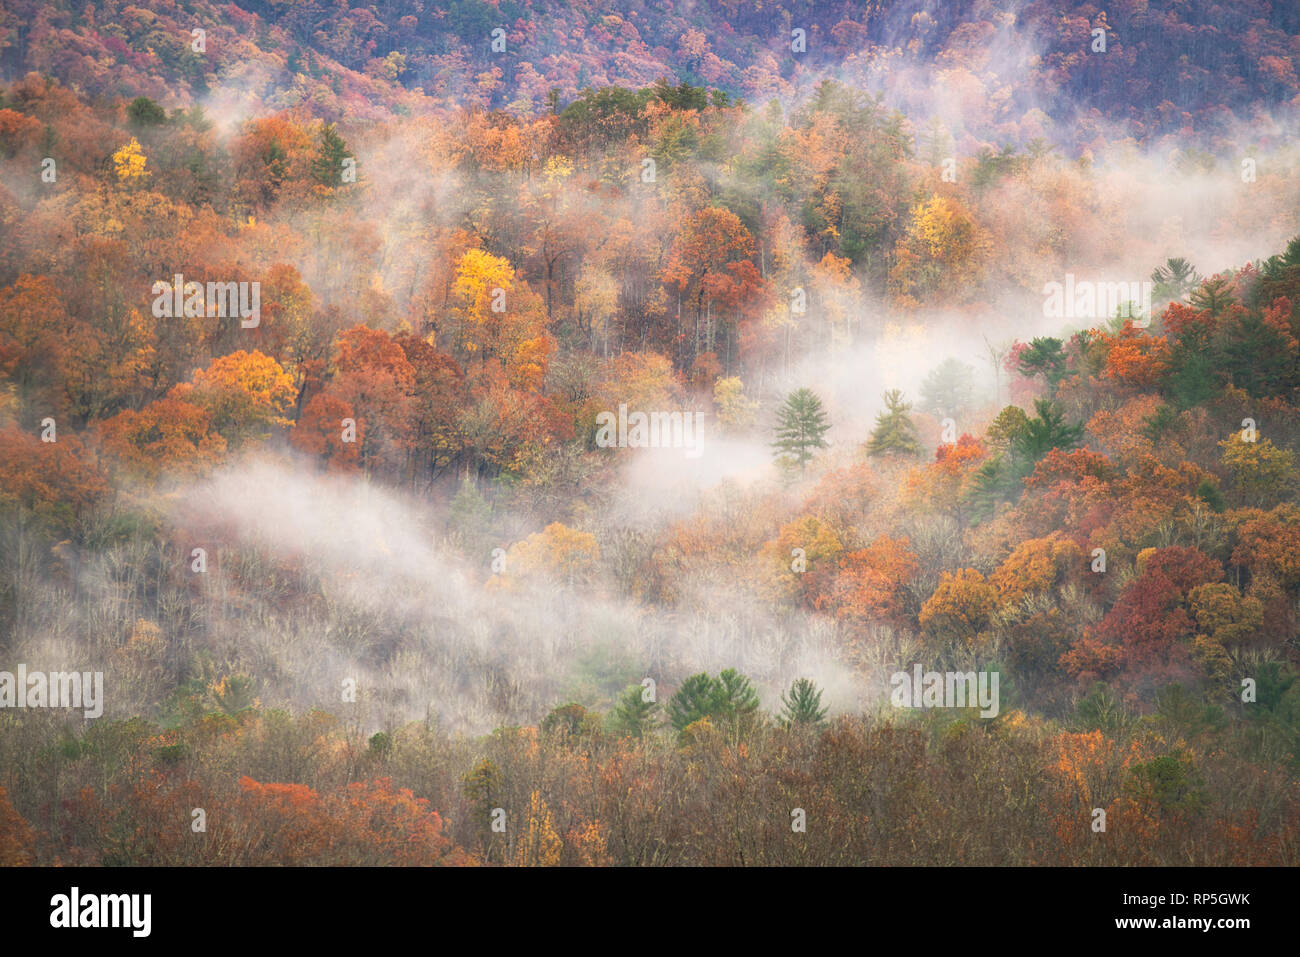 Fog ebbs and flows through autumn forest at Cades Cove, Great Smoky Mountains National Park, Tennesee Stock Photo